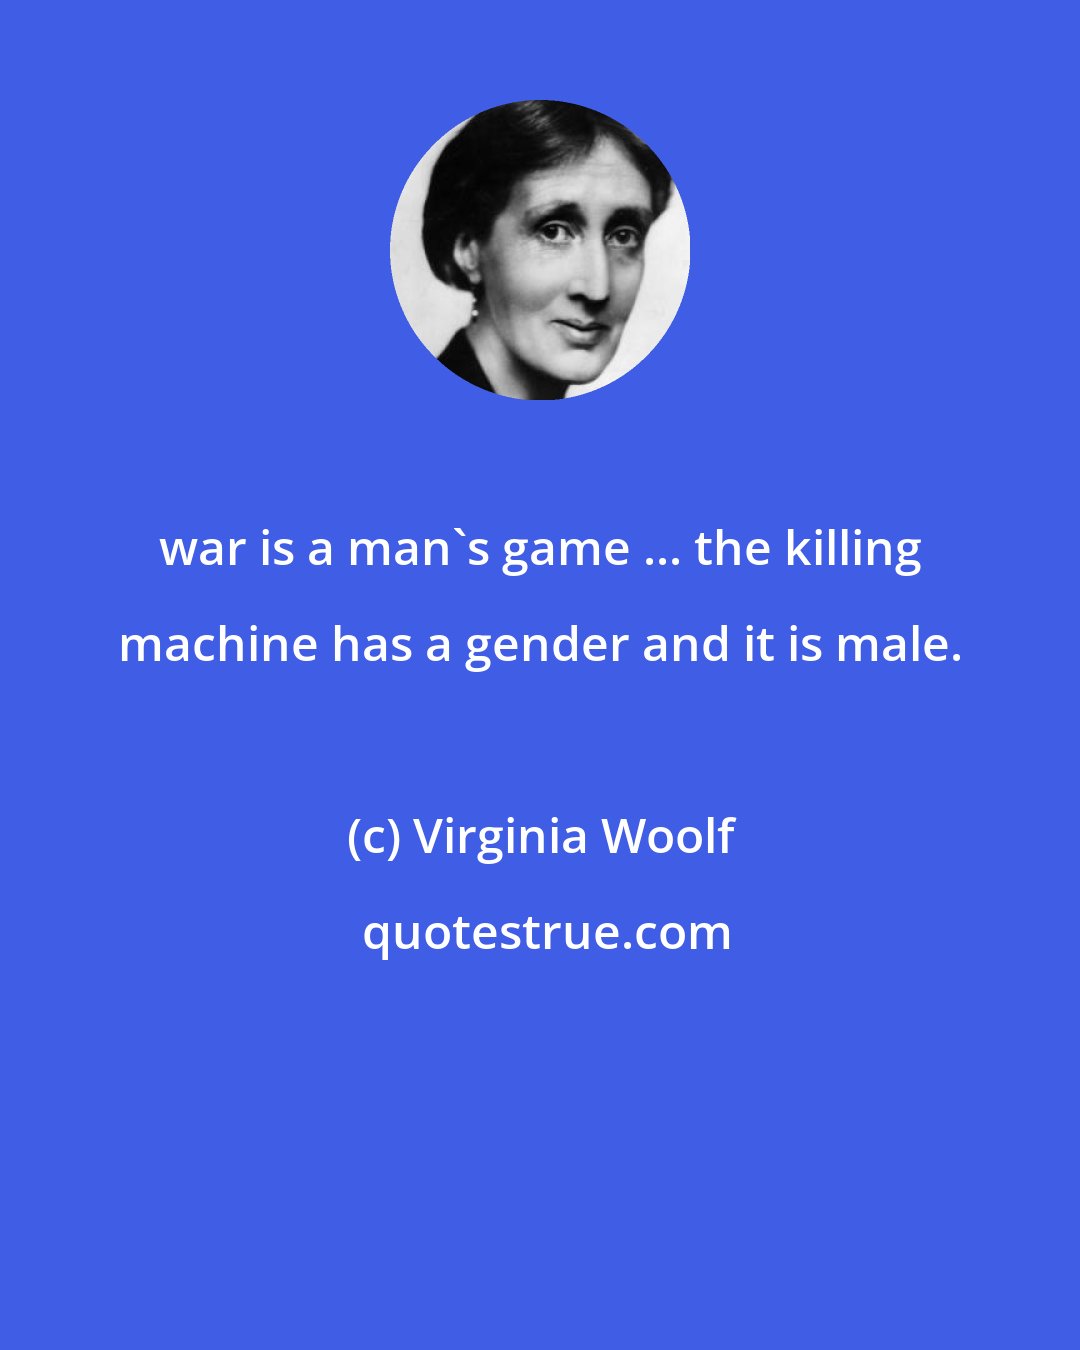 Virginia Woolf: war is a man's game ... the killing machine has a gender and it is male.